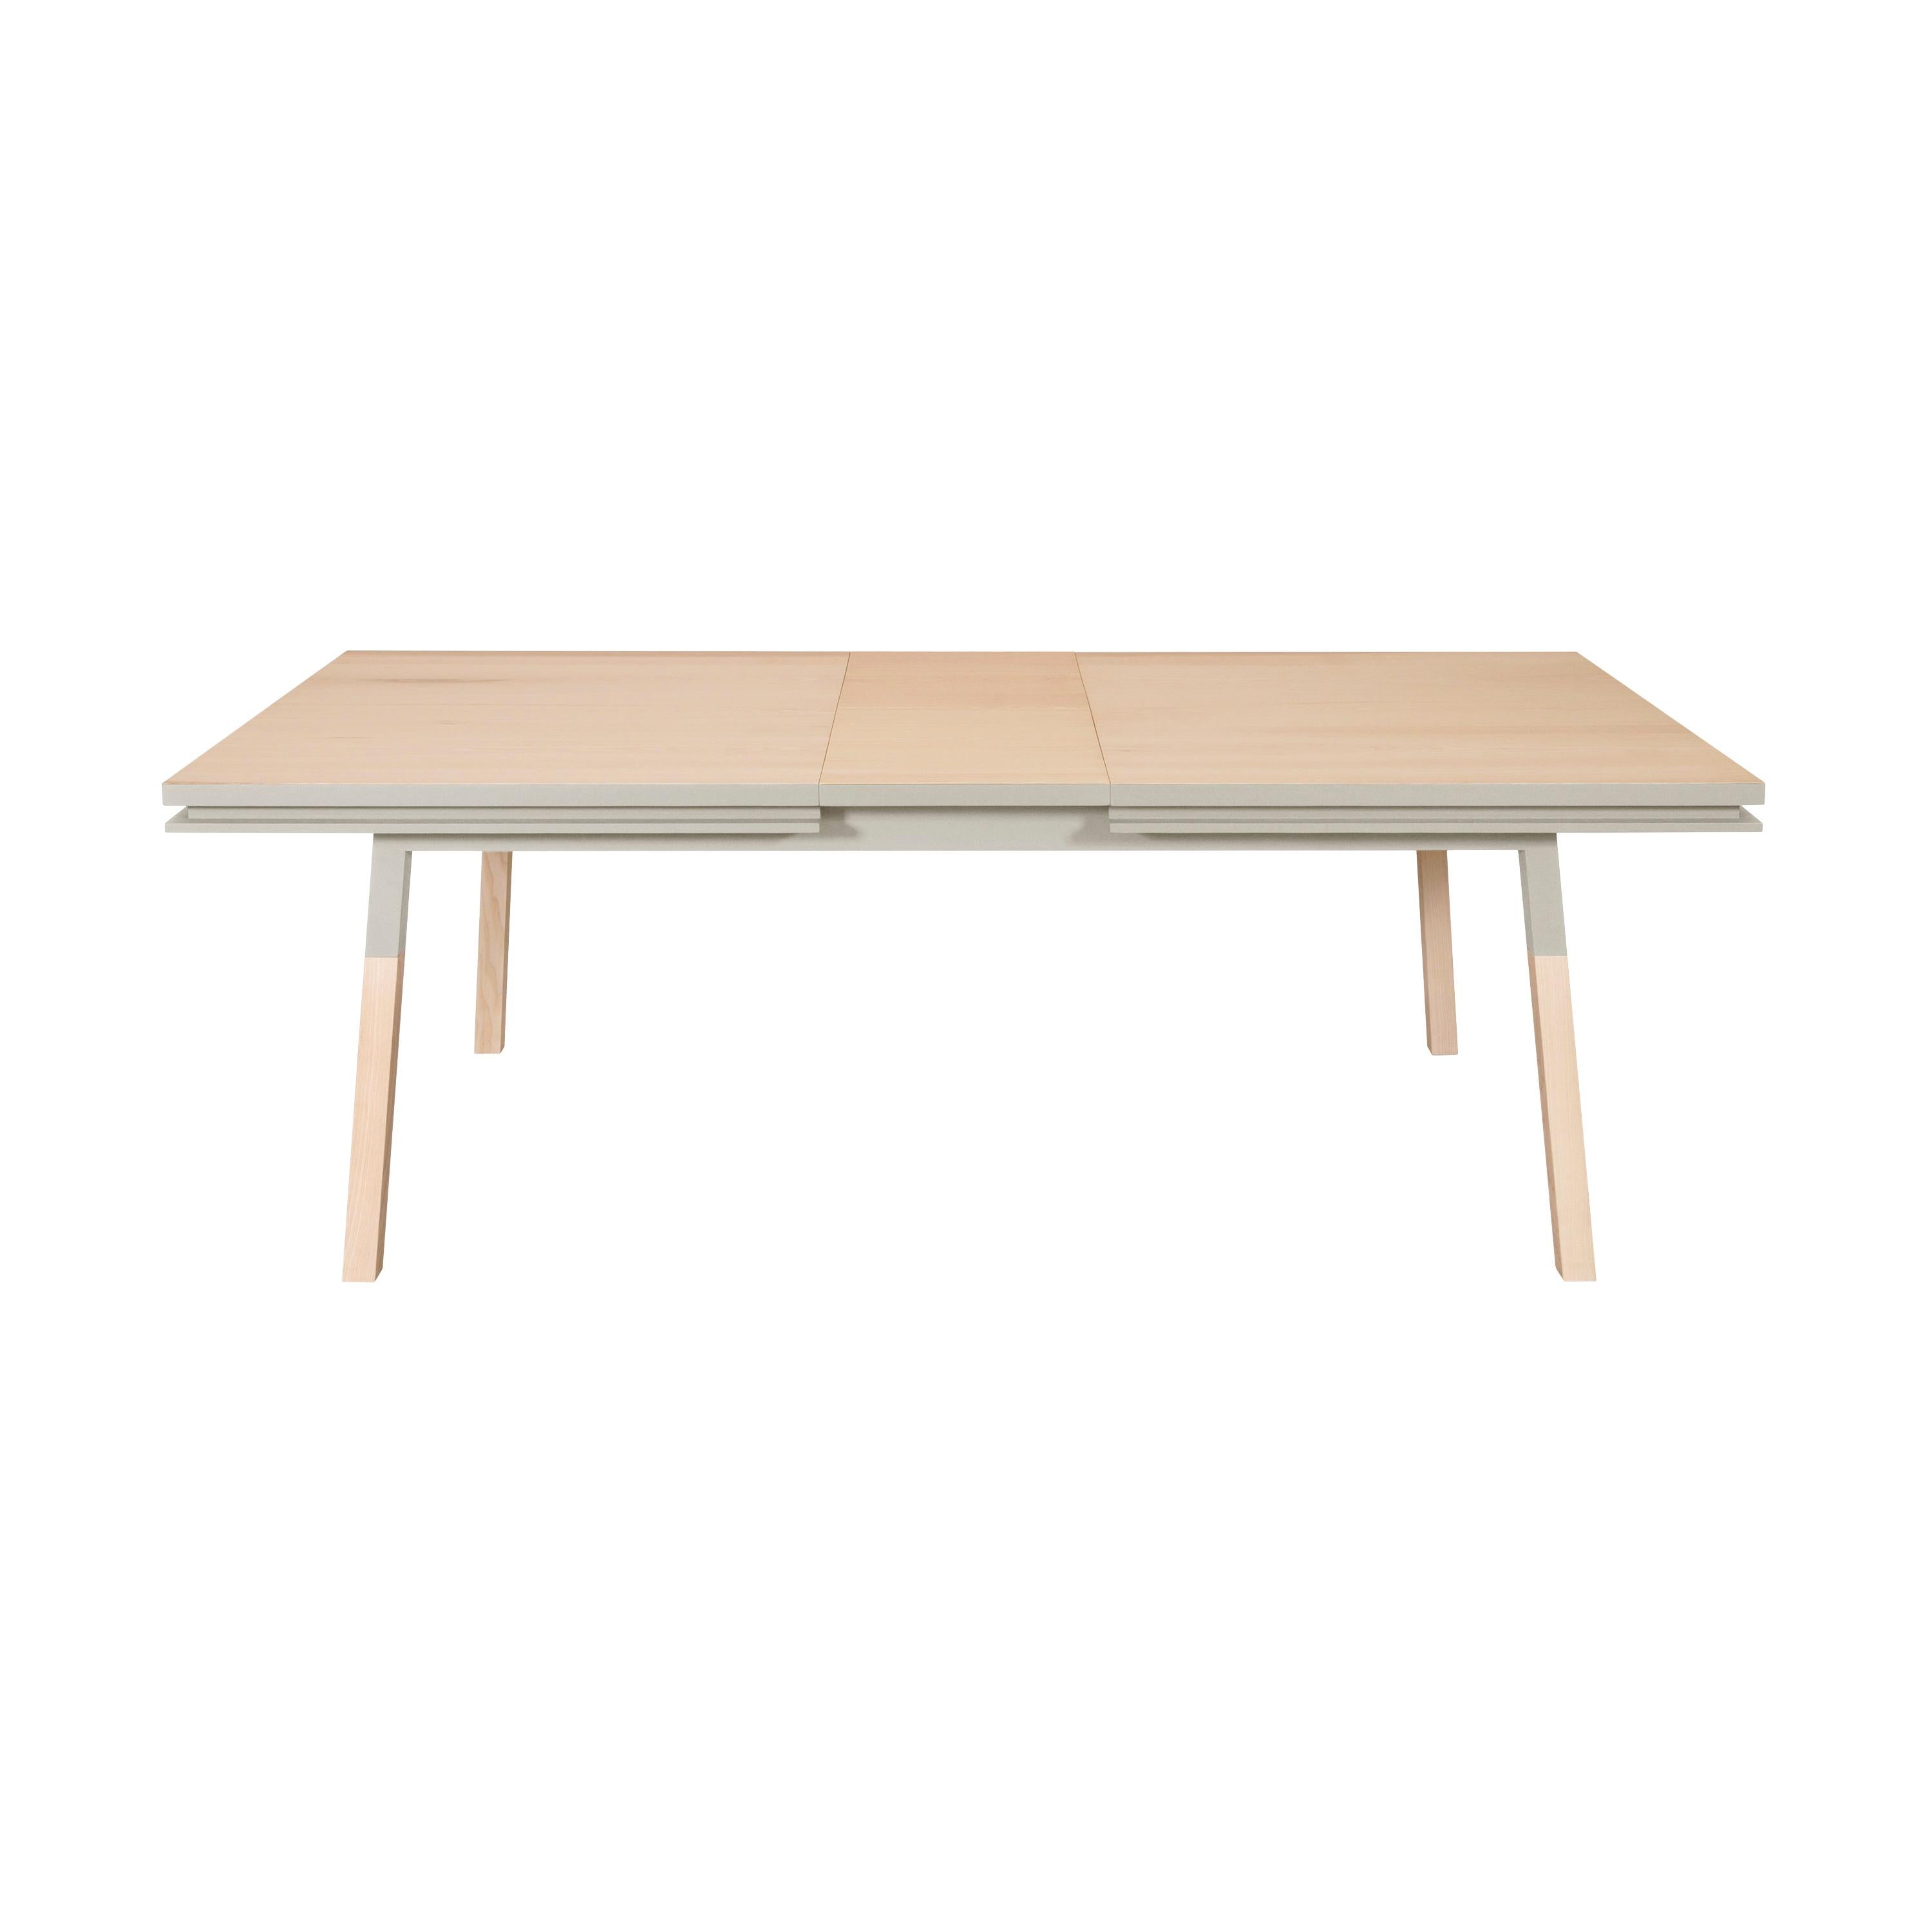 Ash Extensible Dining Table 100% in Solid Wood, Sleek Design by Eric Gizard, Paris  For Sale